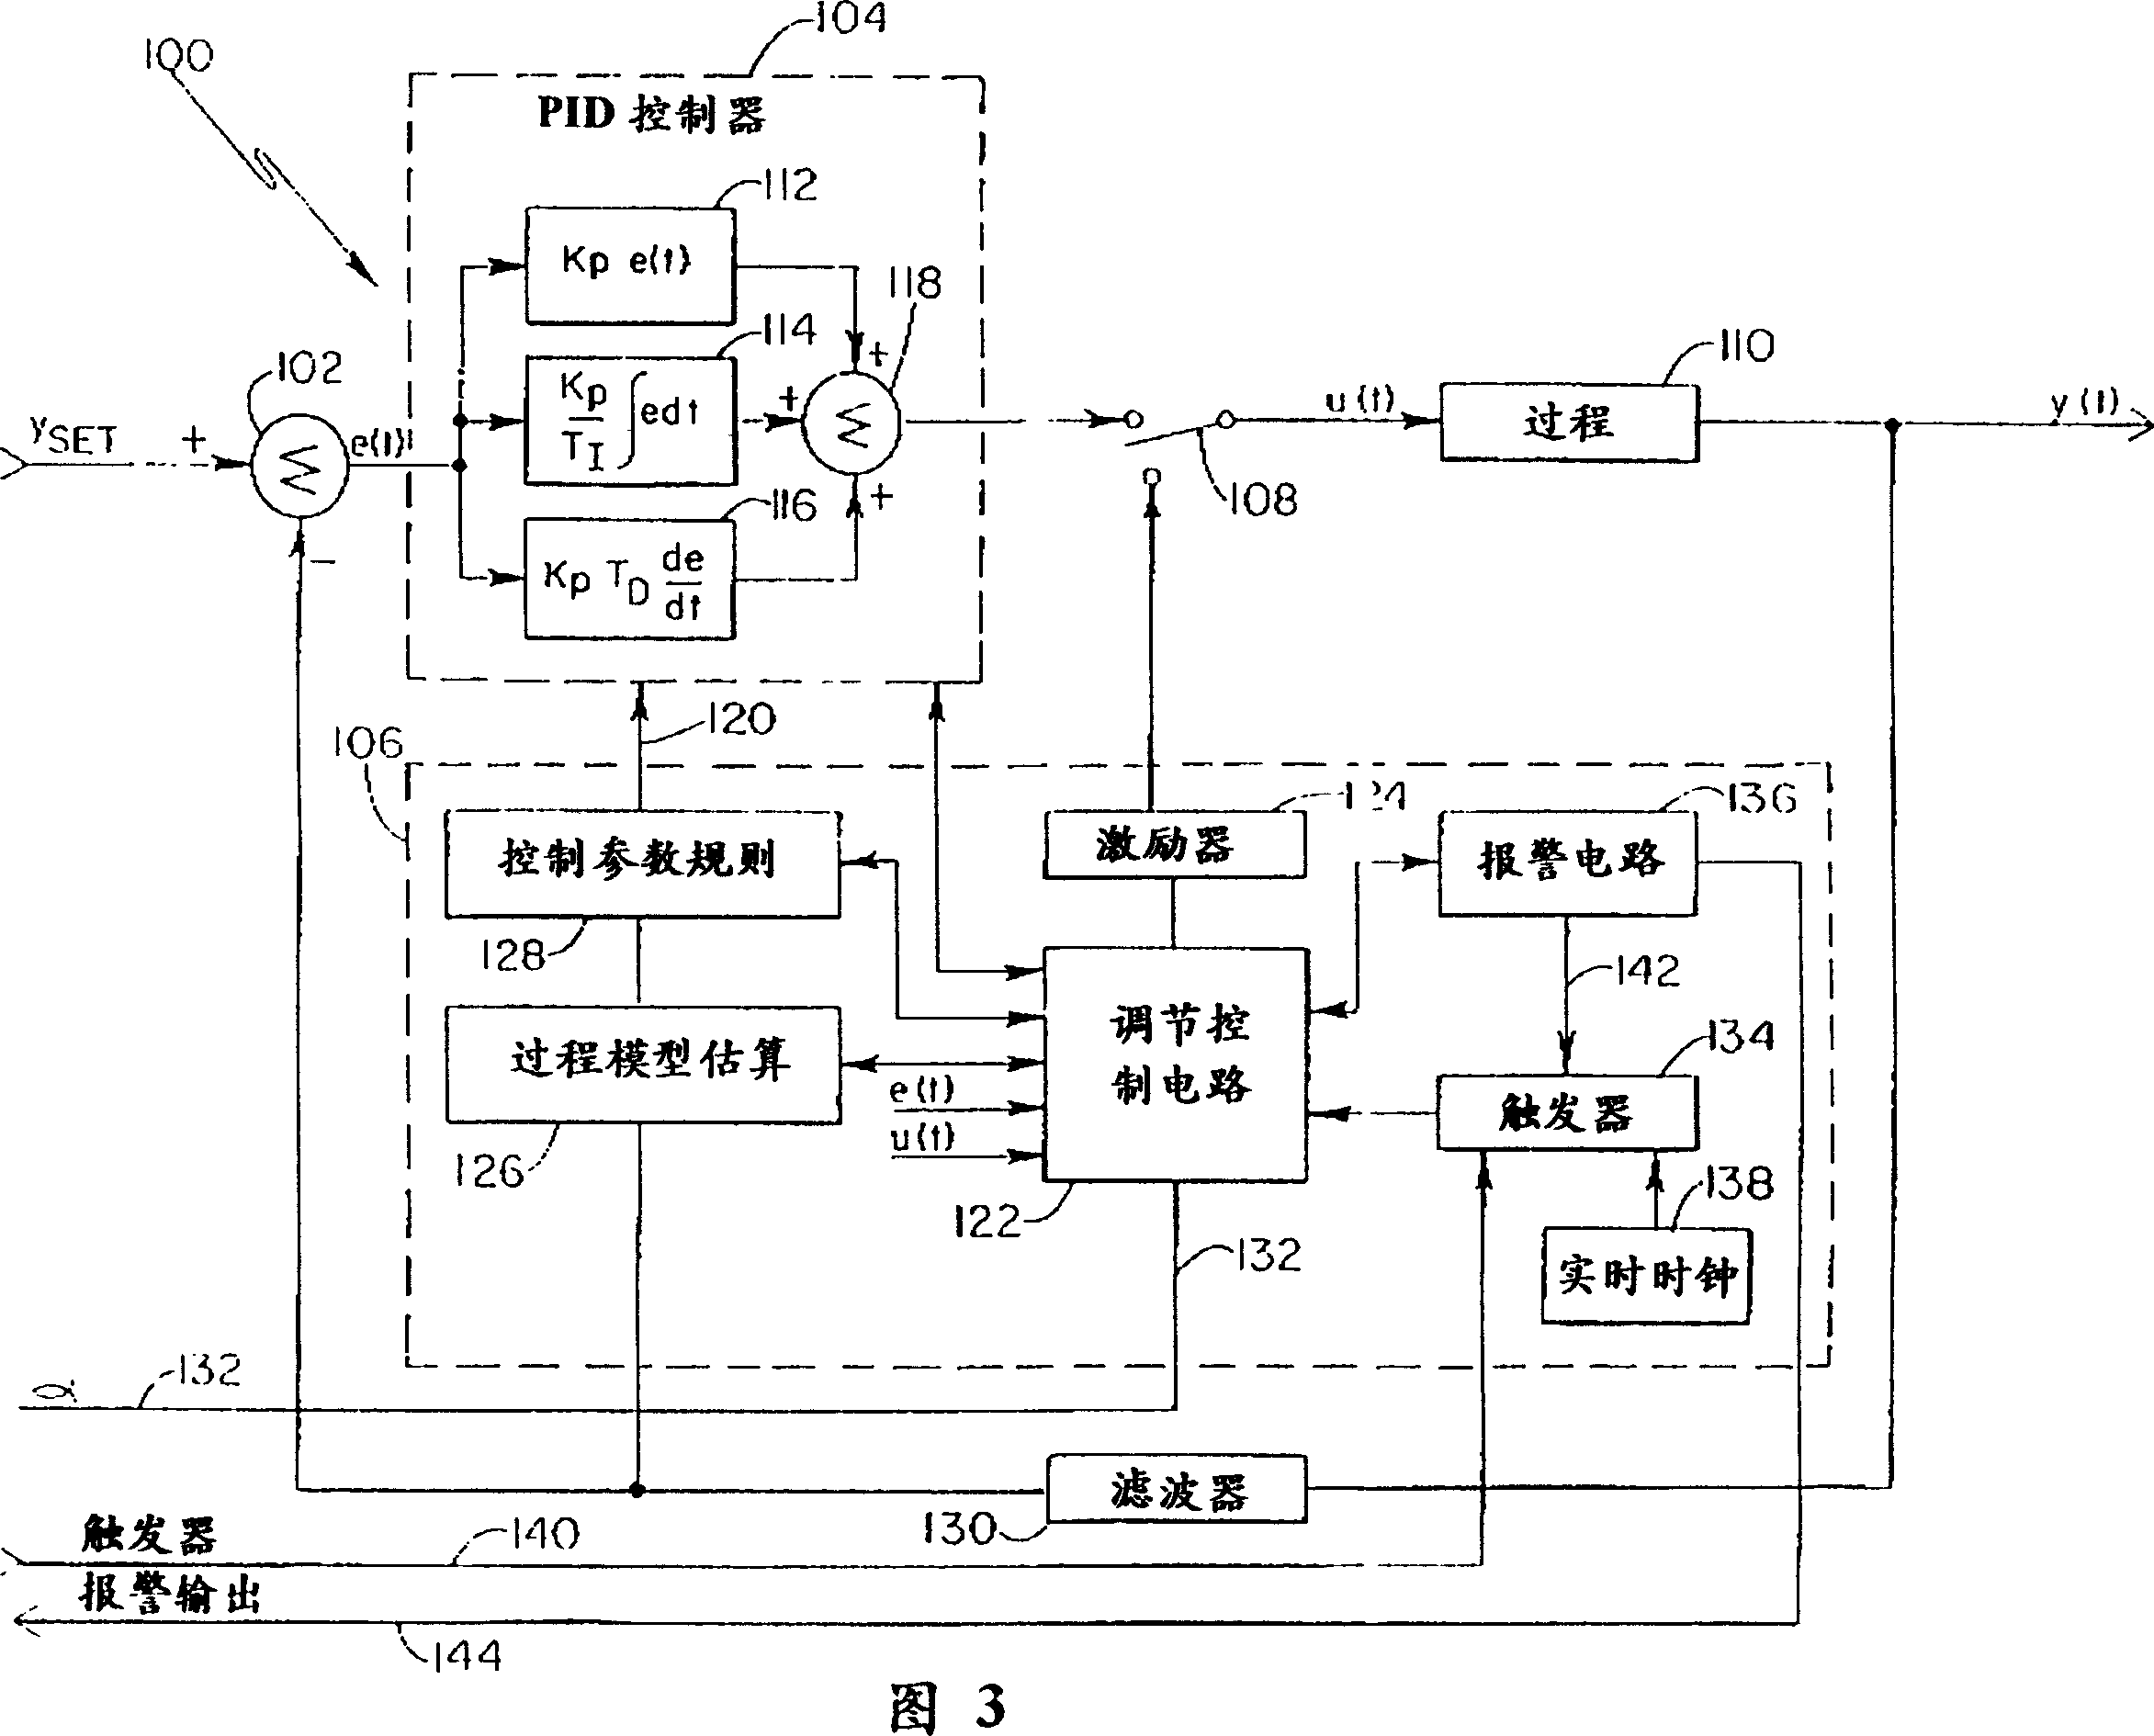 Field based process control system with auto-tuning